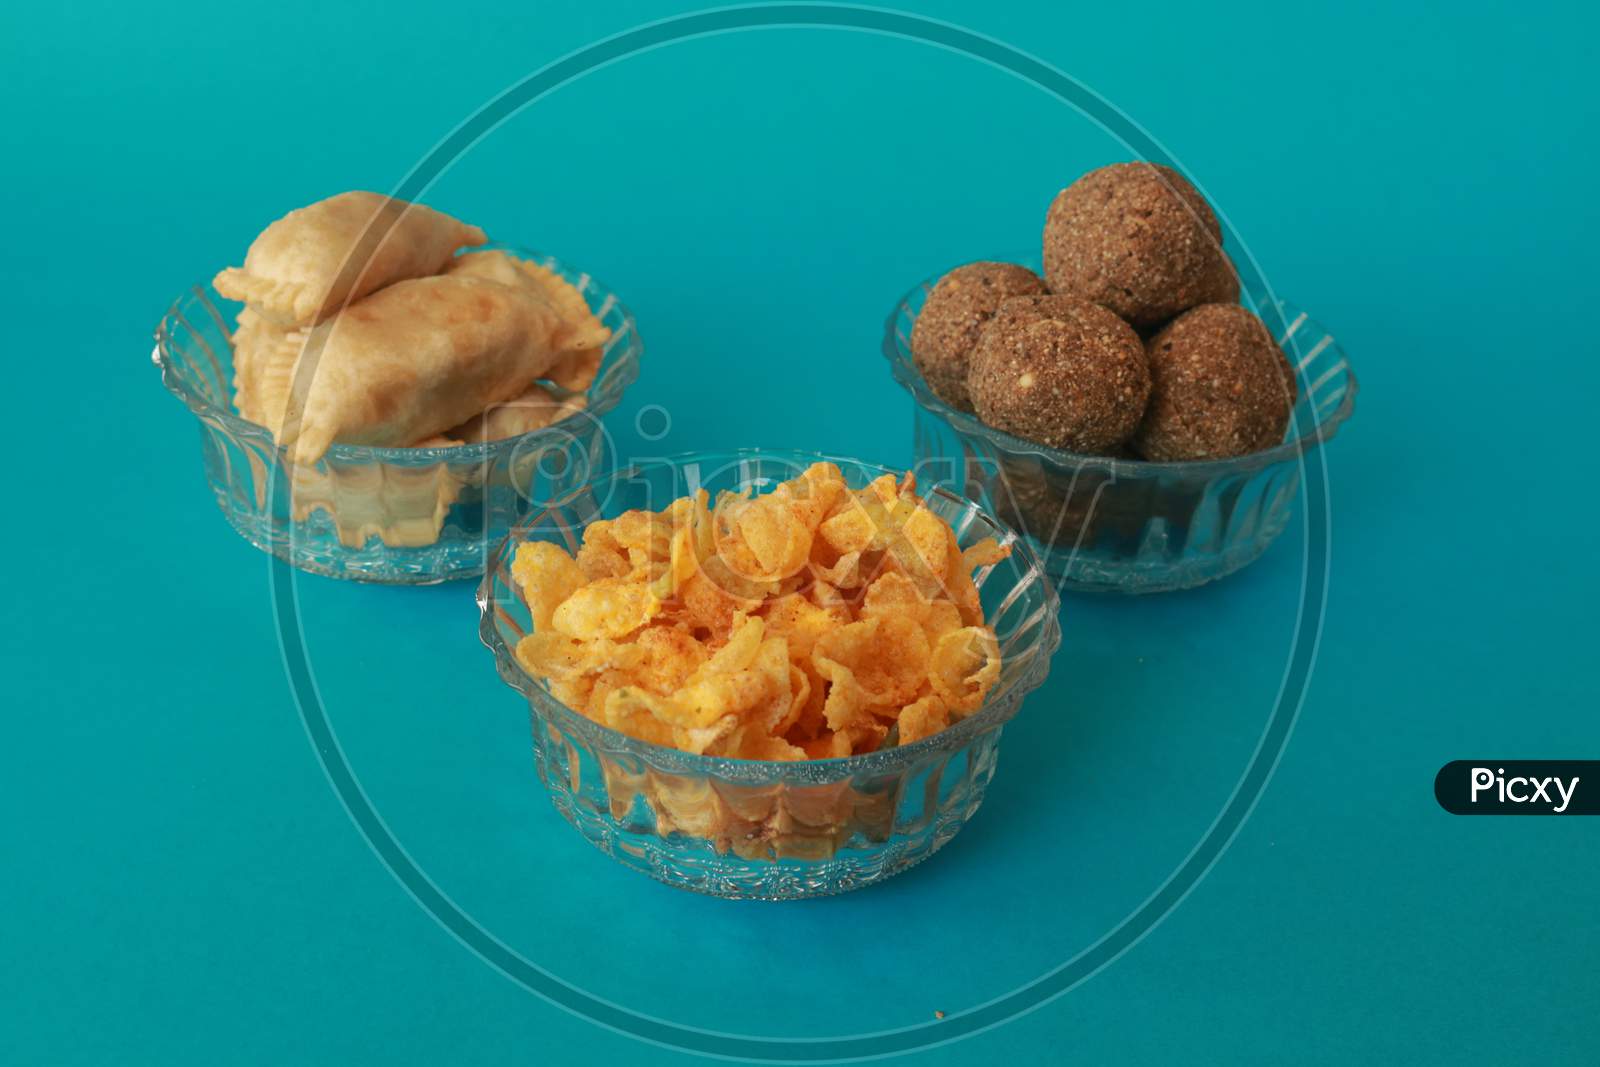 Bhel Poori, An Indian Road Side Snack Different Kinds Of Nuts As A Salty Snack, With Olives And Pepper